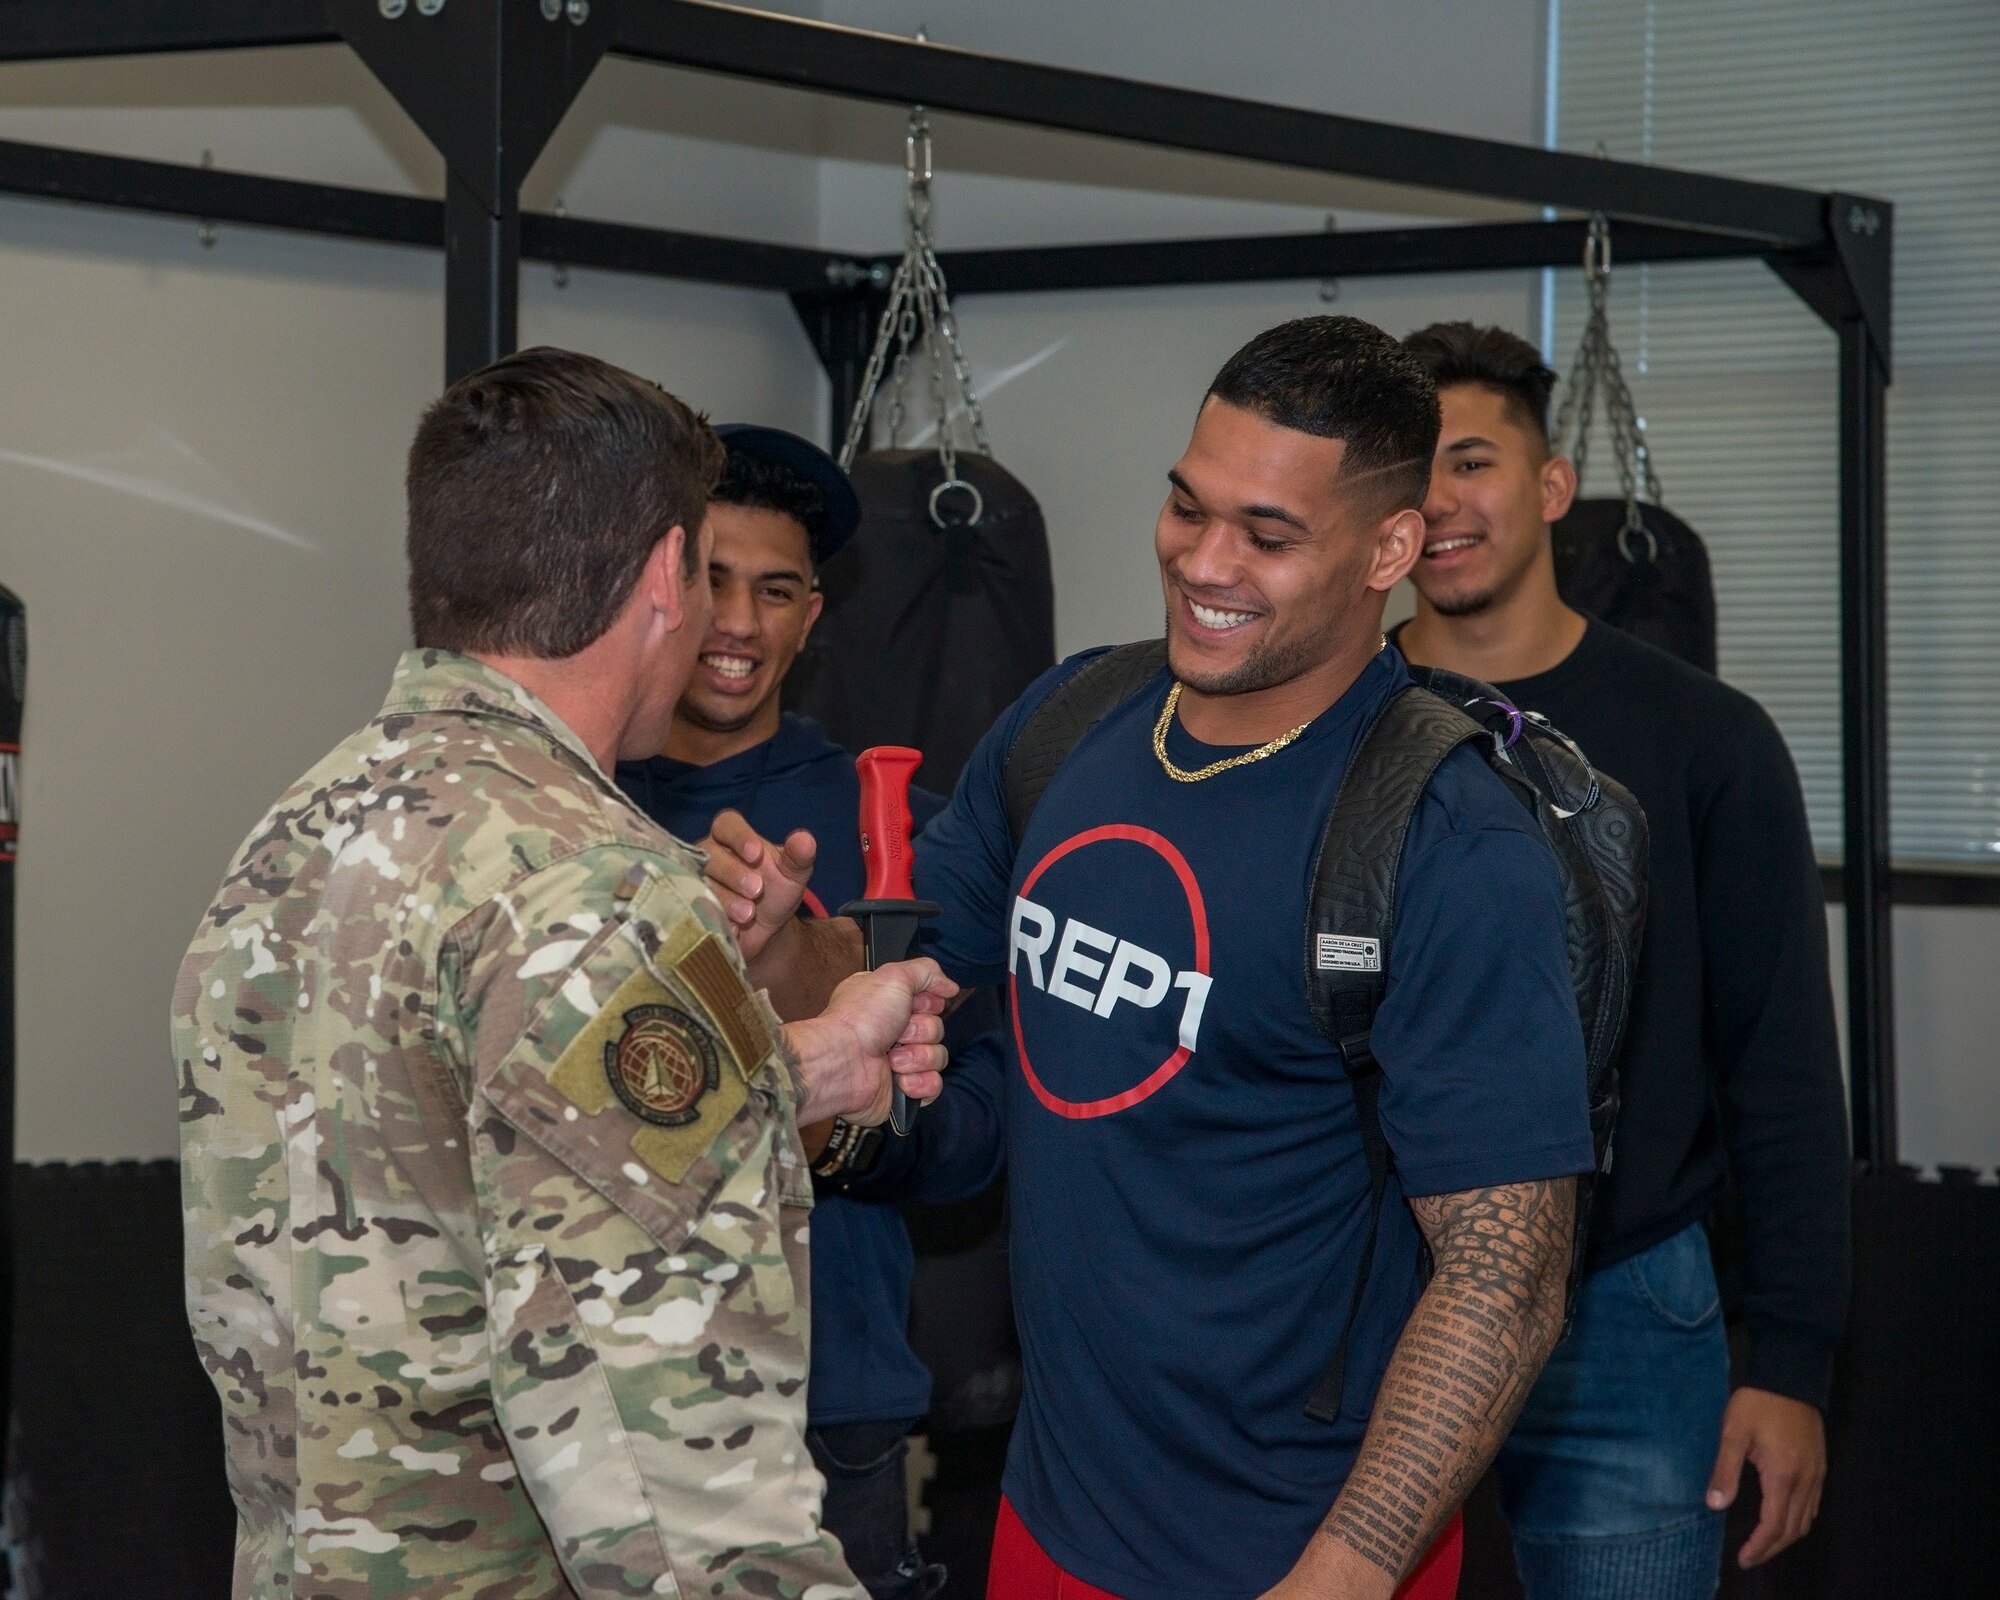 U.S. Air Force Tech. Sgt. Jesse Soboleski, a Survival, Evasion, Resistance and Escape (SERE) noncommissioned officer in charge, demonstrates SERE capabilities to Pittsburgh Steelers running back James Conner, and MacDill Air Force Base, Fla., Jan. 28, 2020.